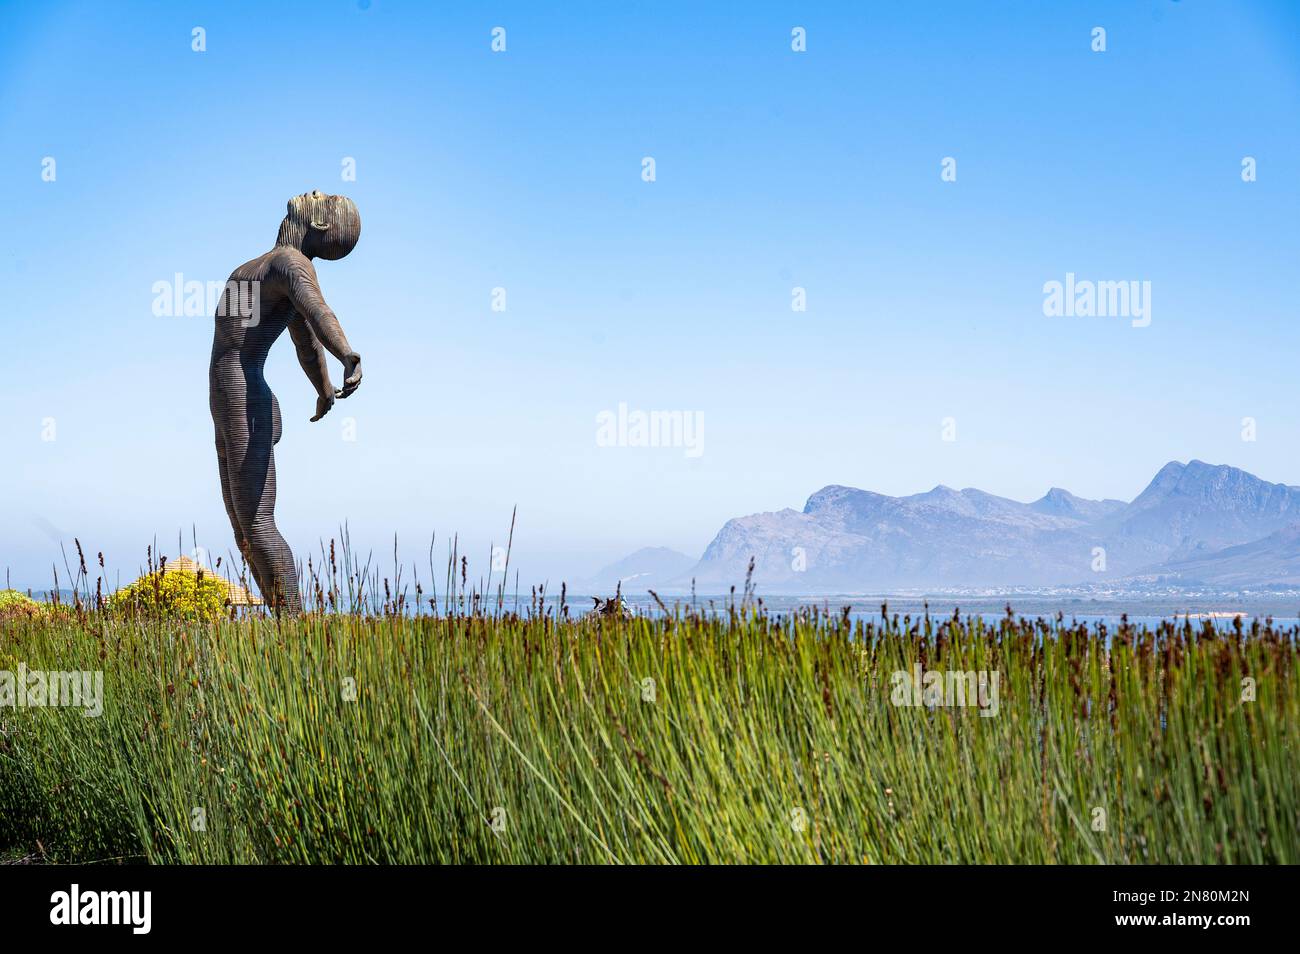 Faith by Anton Smit, Benguela Cove winery, Walker Bay, Western Cape, South Africa Stock Photo